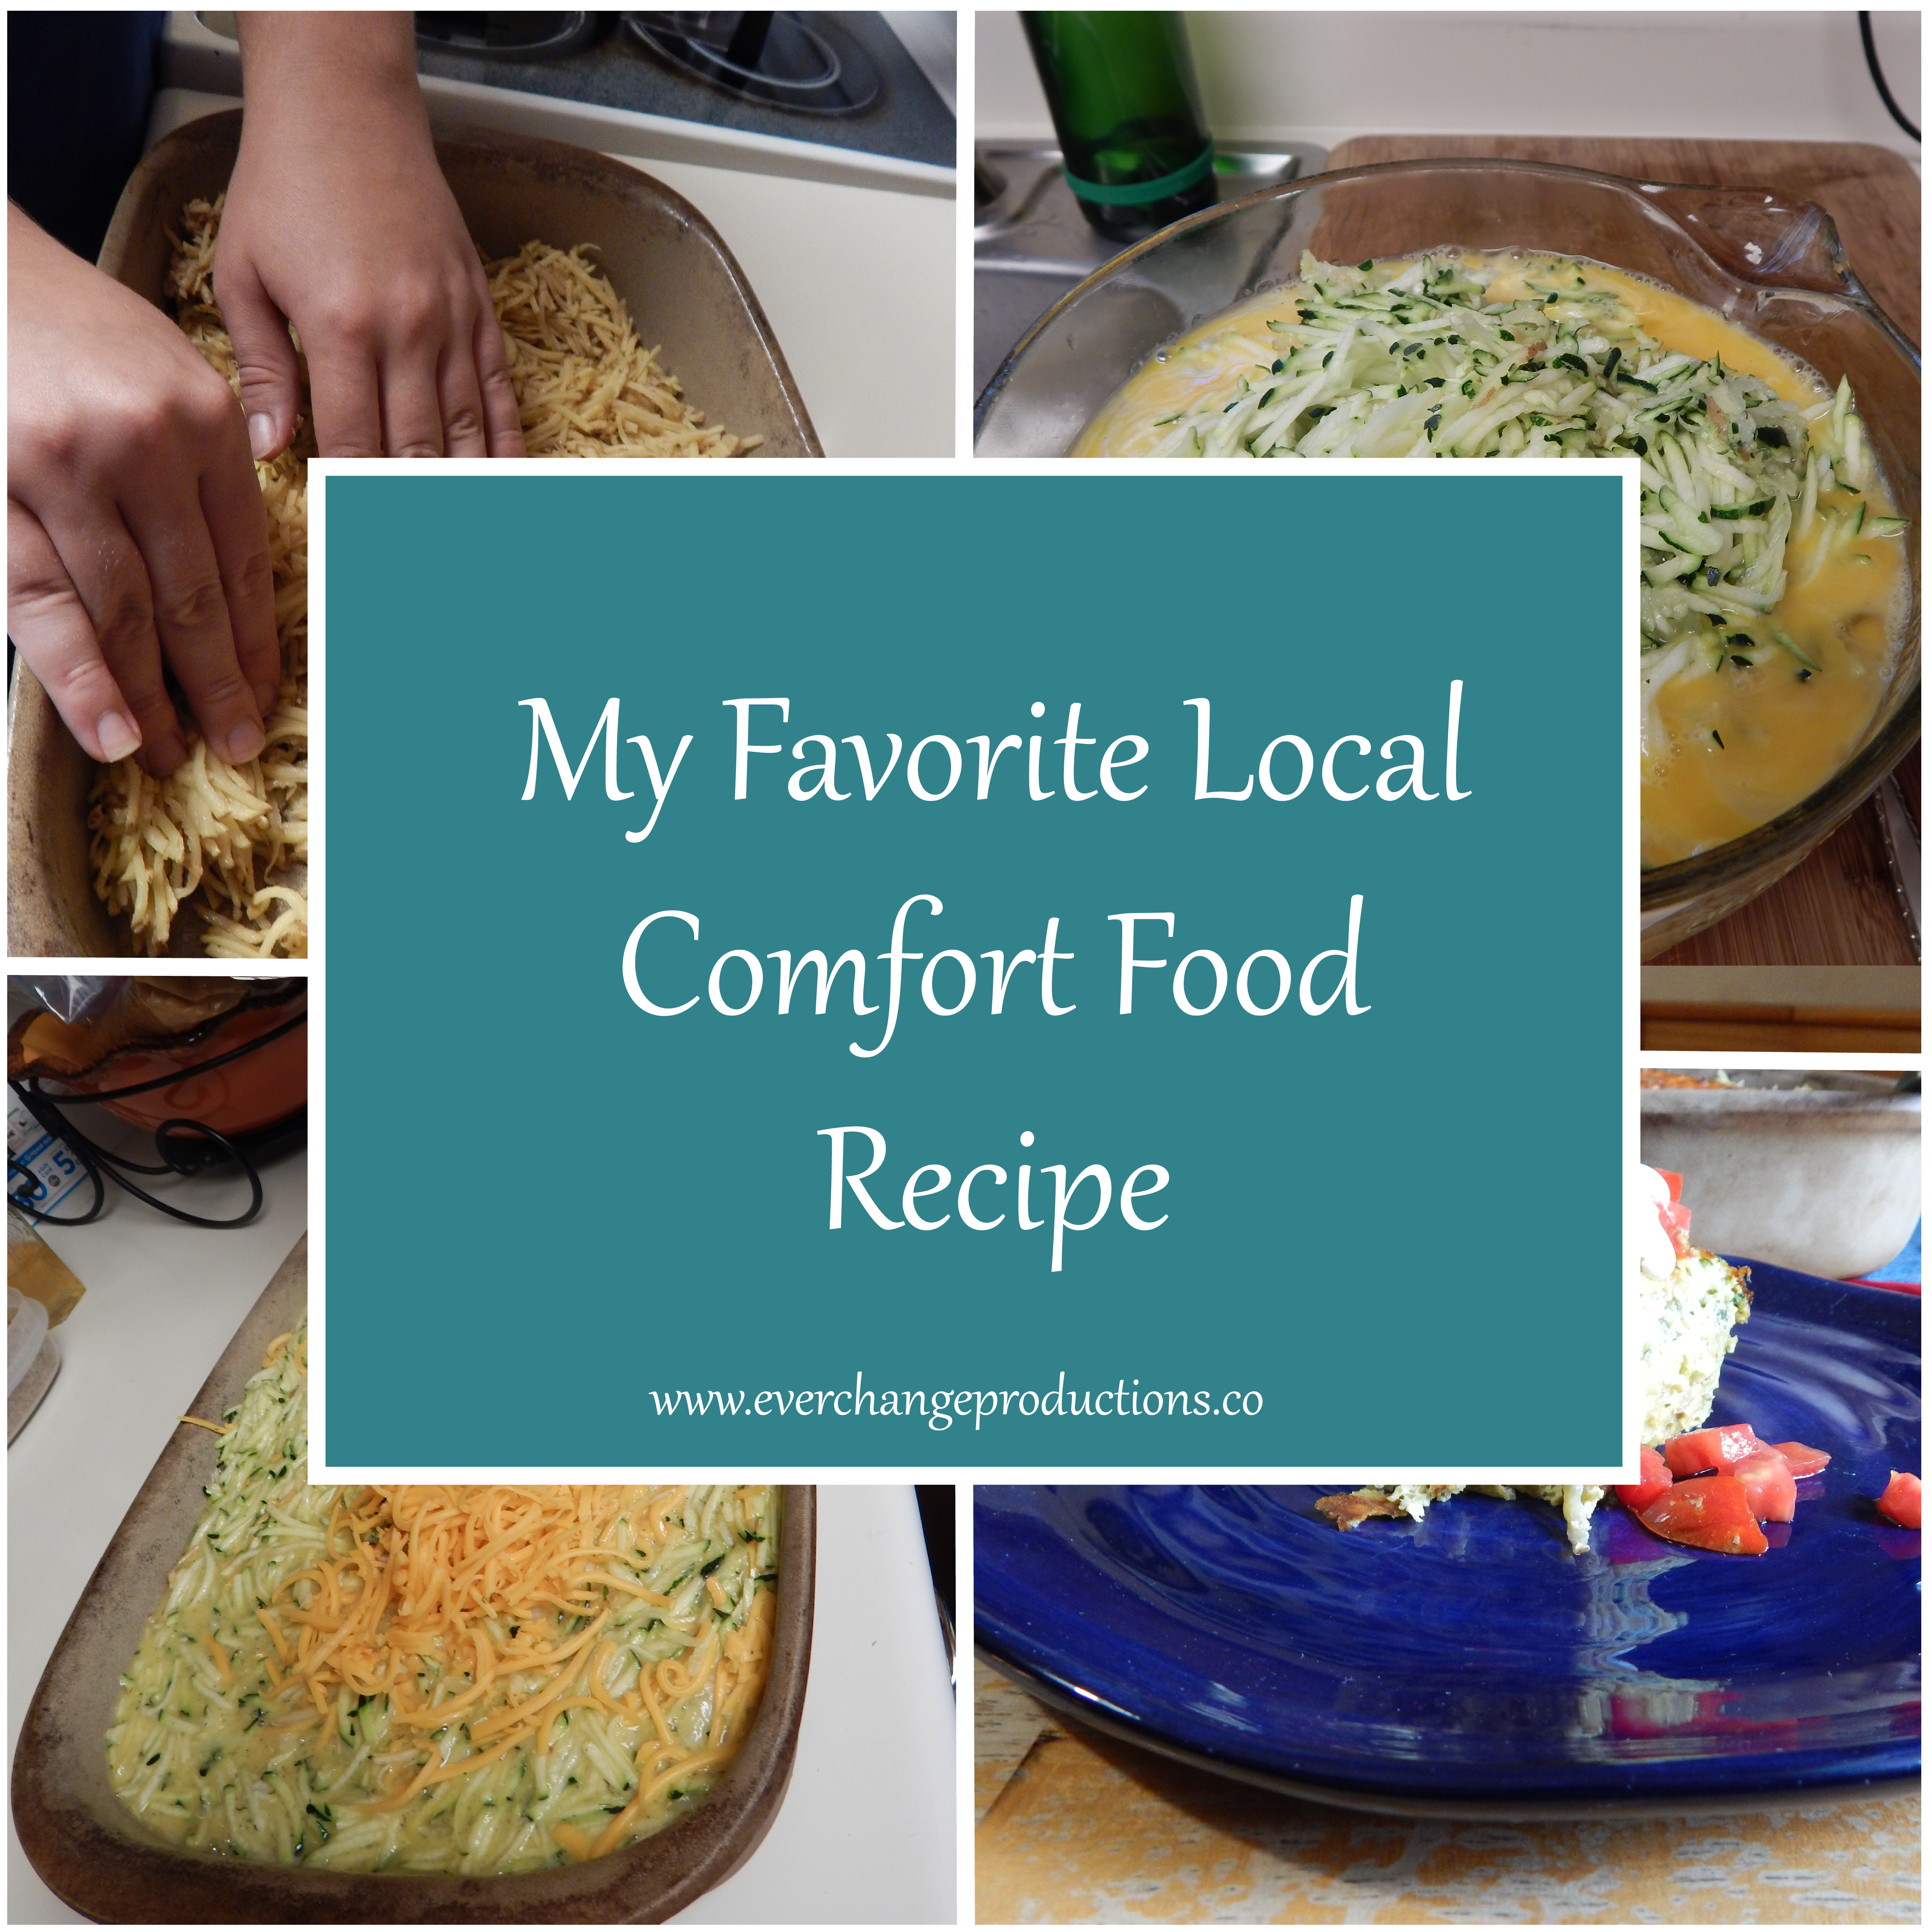 My favorite comfort food is one made from completely local ingredients. Join me to find out my favorite locally made recipe.